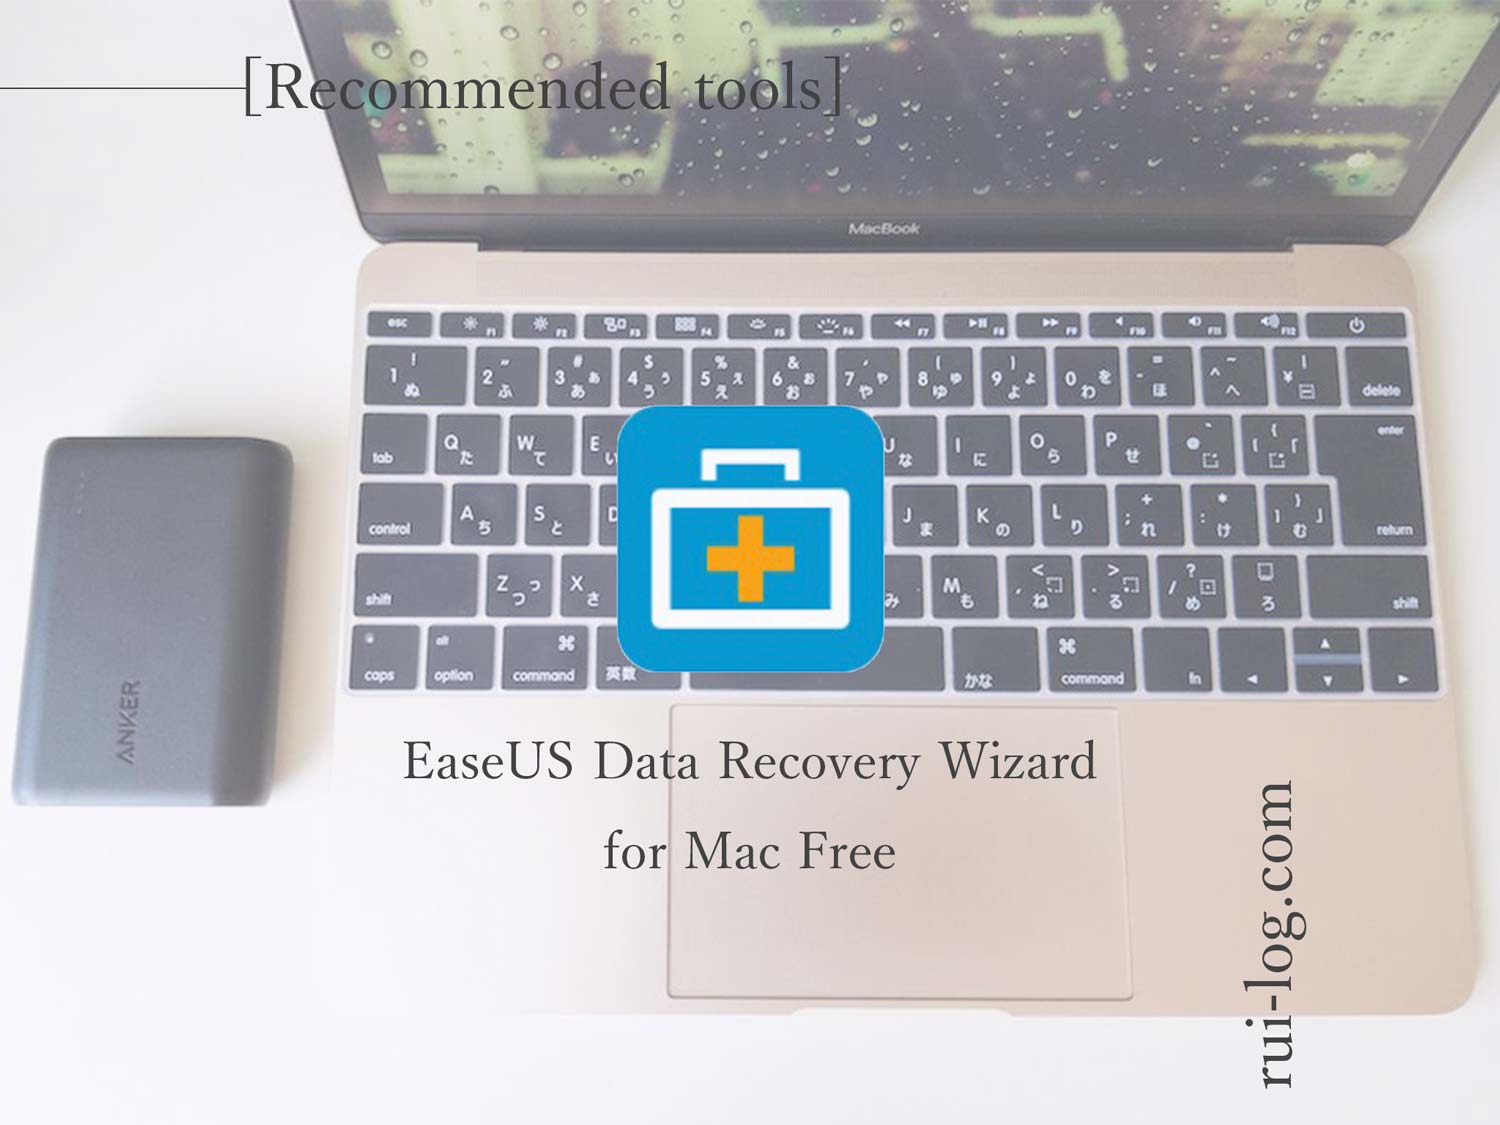 EaseUS-DataRecoveryWizard-forMacFreeをルイログがレビュー